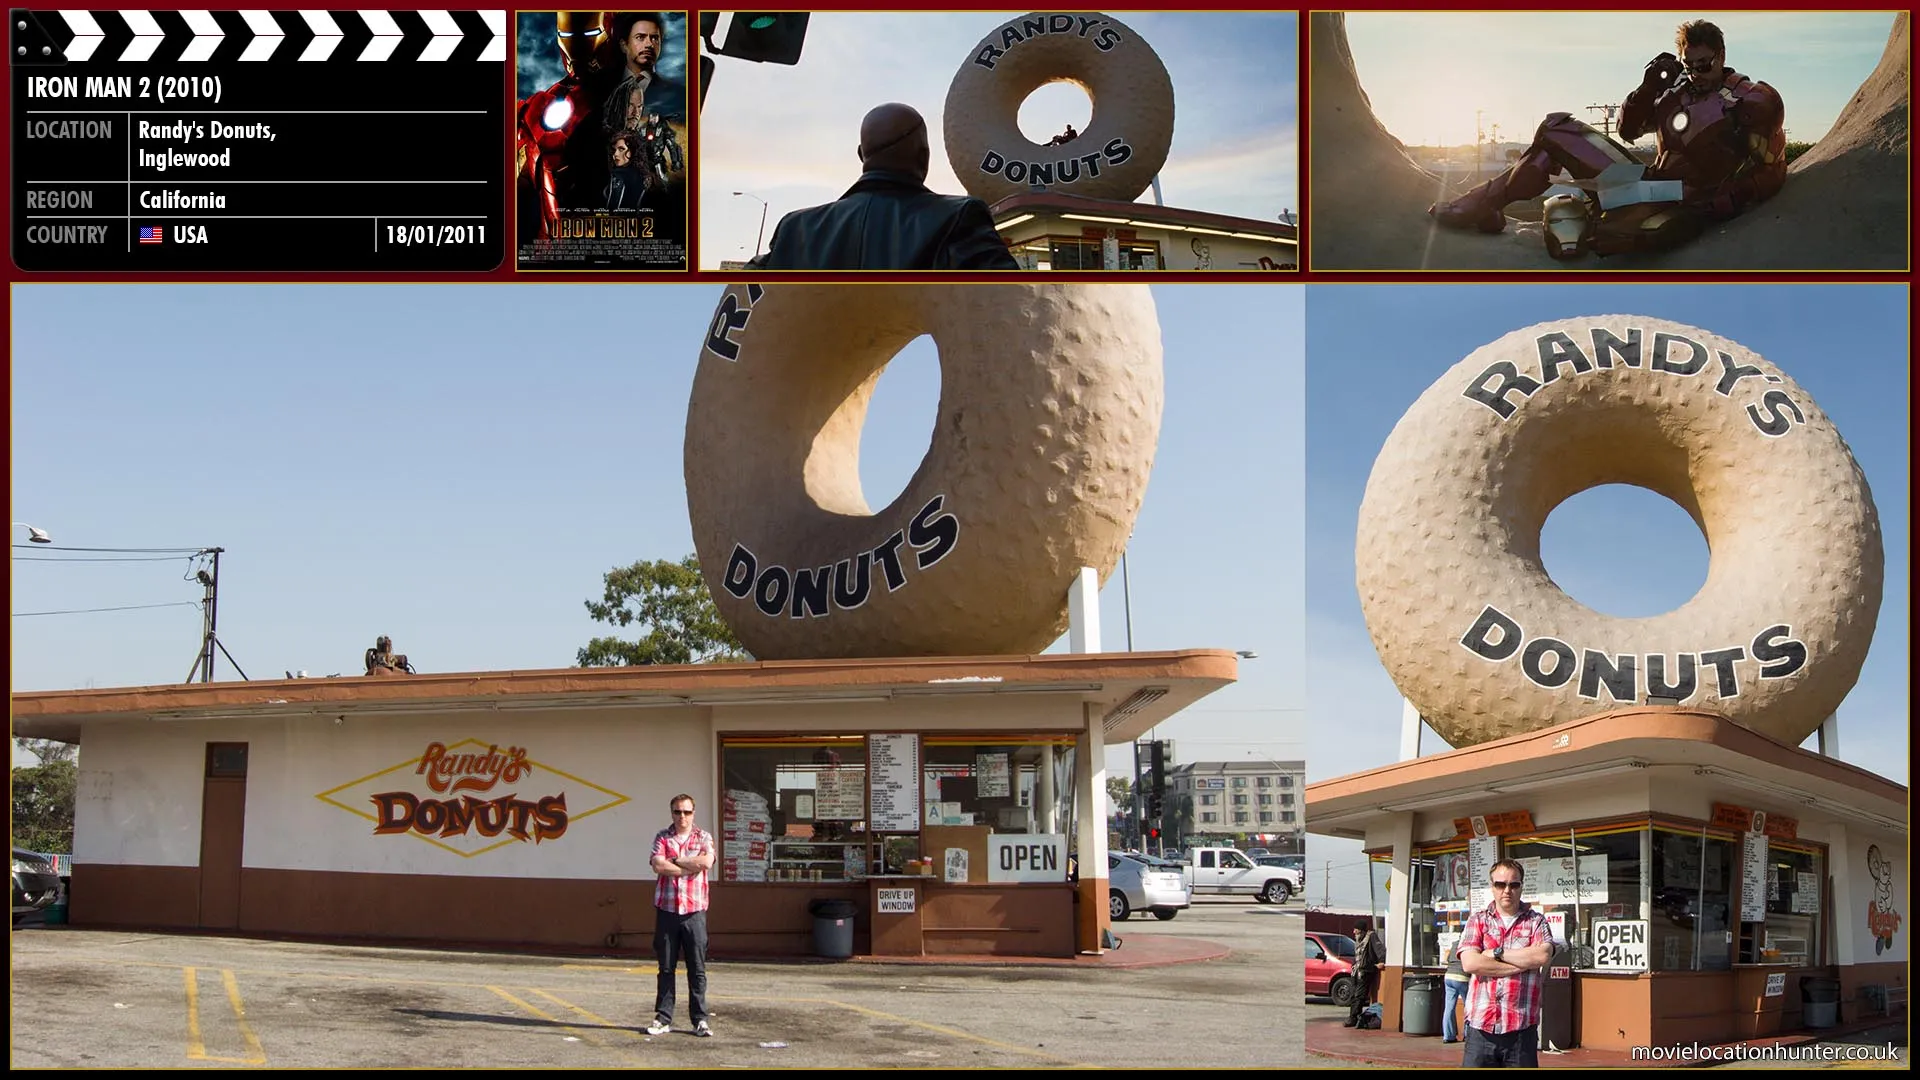 Filming location photo, shot in USA, for Iron Man 2 (2010). Scene description: The next day, Tony (Robert Downey Jr.) is at the famous Los Angeles landmark doughnut shop Randy's Doughnuts, sitting in the Iron Man suit atop the famous giant plastered doughnut. Disgraced and hungover, Tony is approached by SHIELD director Nick Fury (Samuel L. Jackson), who tells Stark that despite the problems he's having with the government and his drunken Iron Man antics, which are the least of his worries; Fury has an issue to deal with in the Southwest United States.